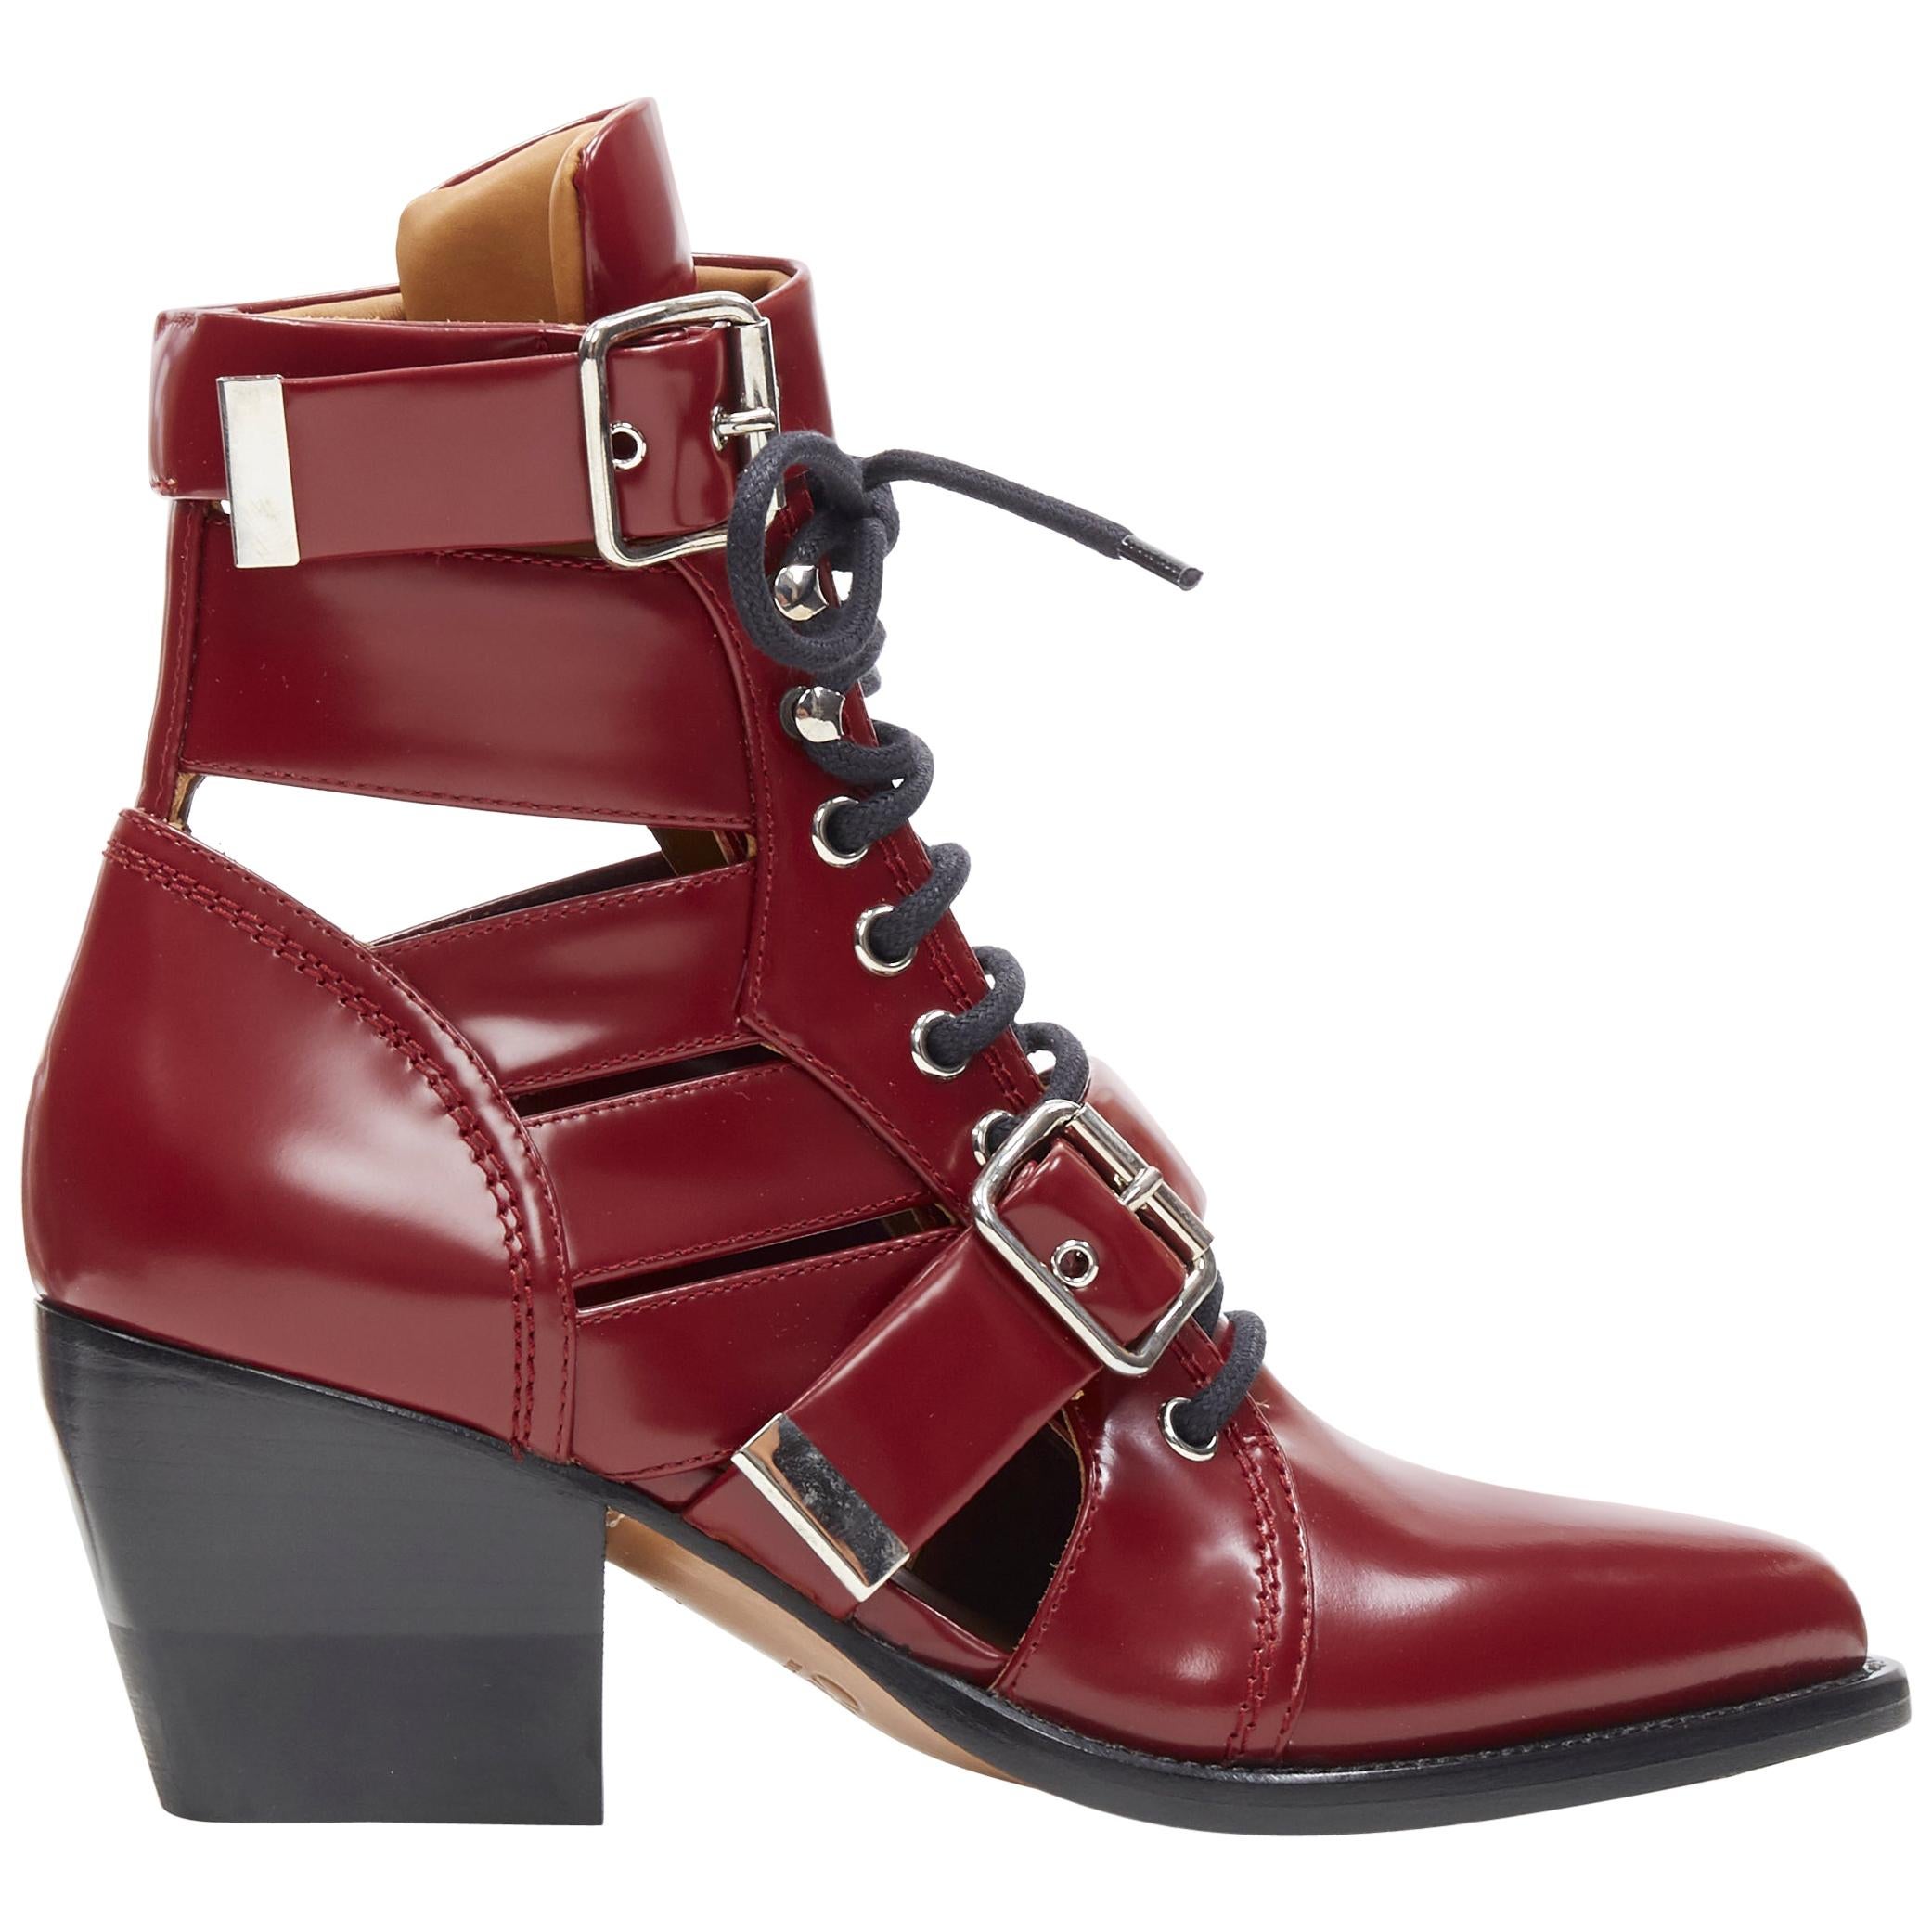 new CHLOE Rylee burgundy red leather cut out buckled pointy ankle boot EU40.5